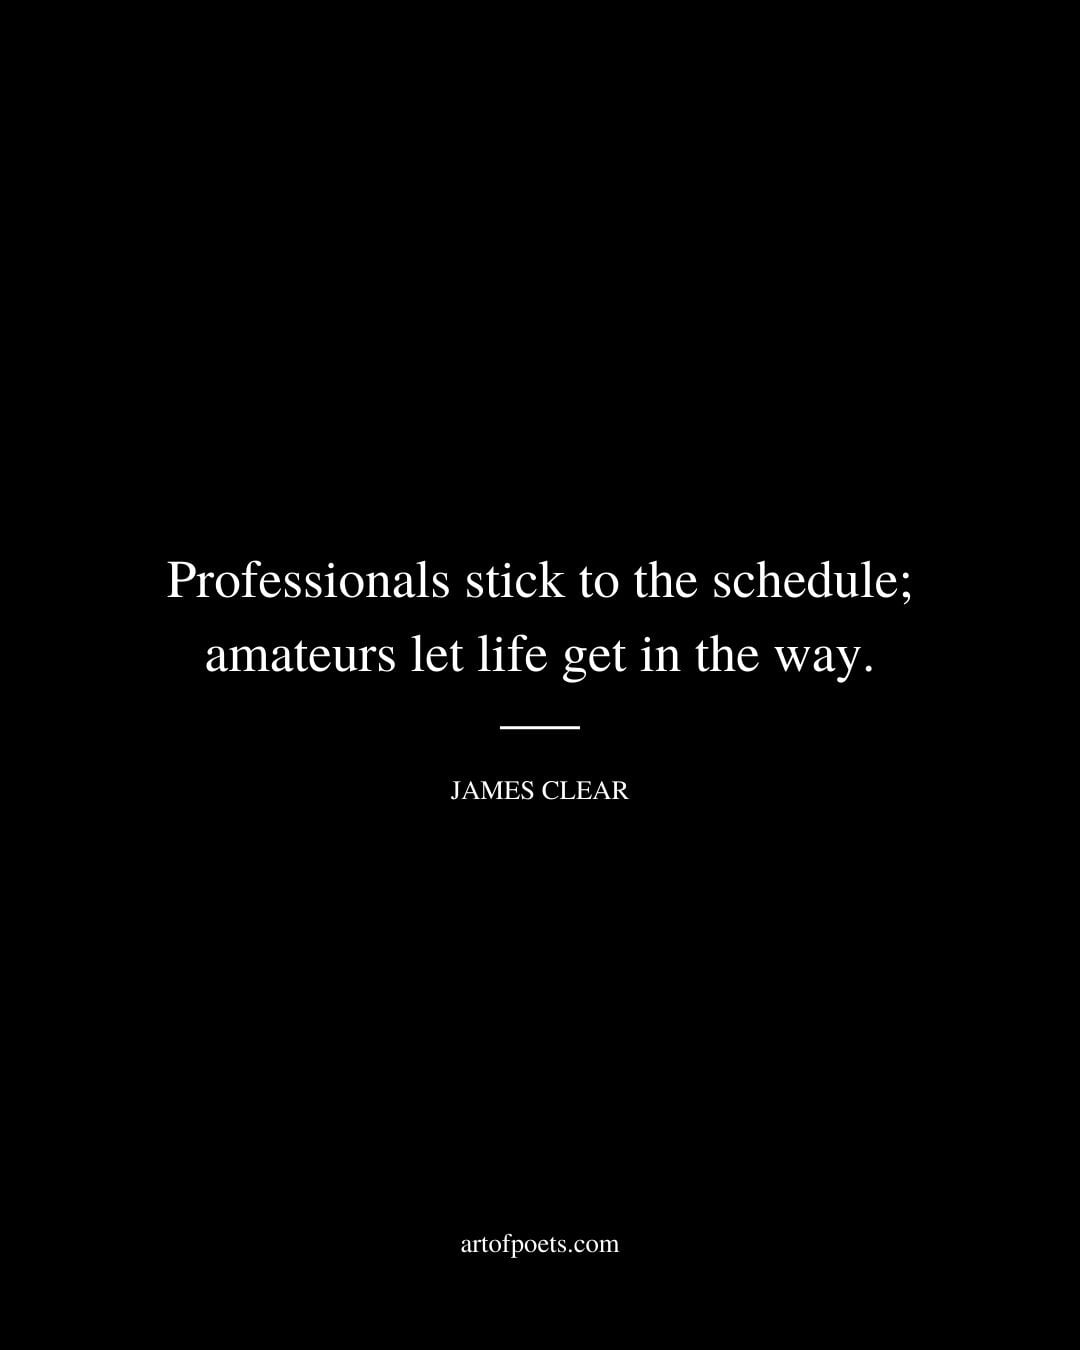 Professionals stick to the schedule amateurs let life get in the way